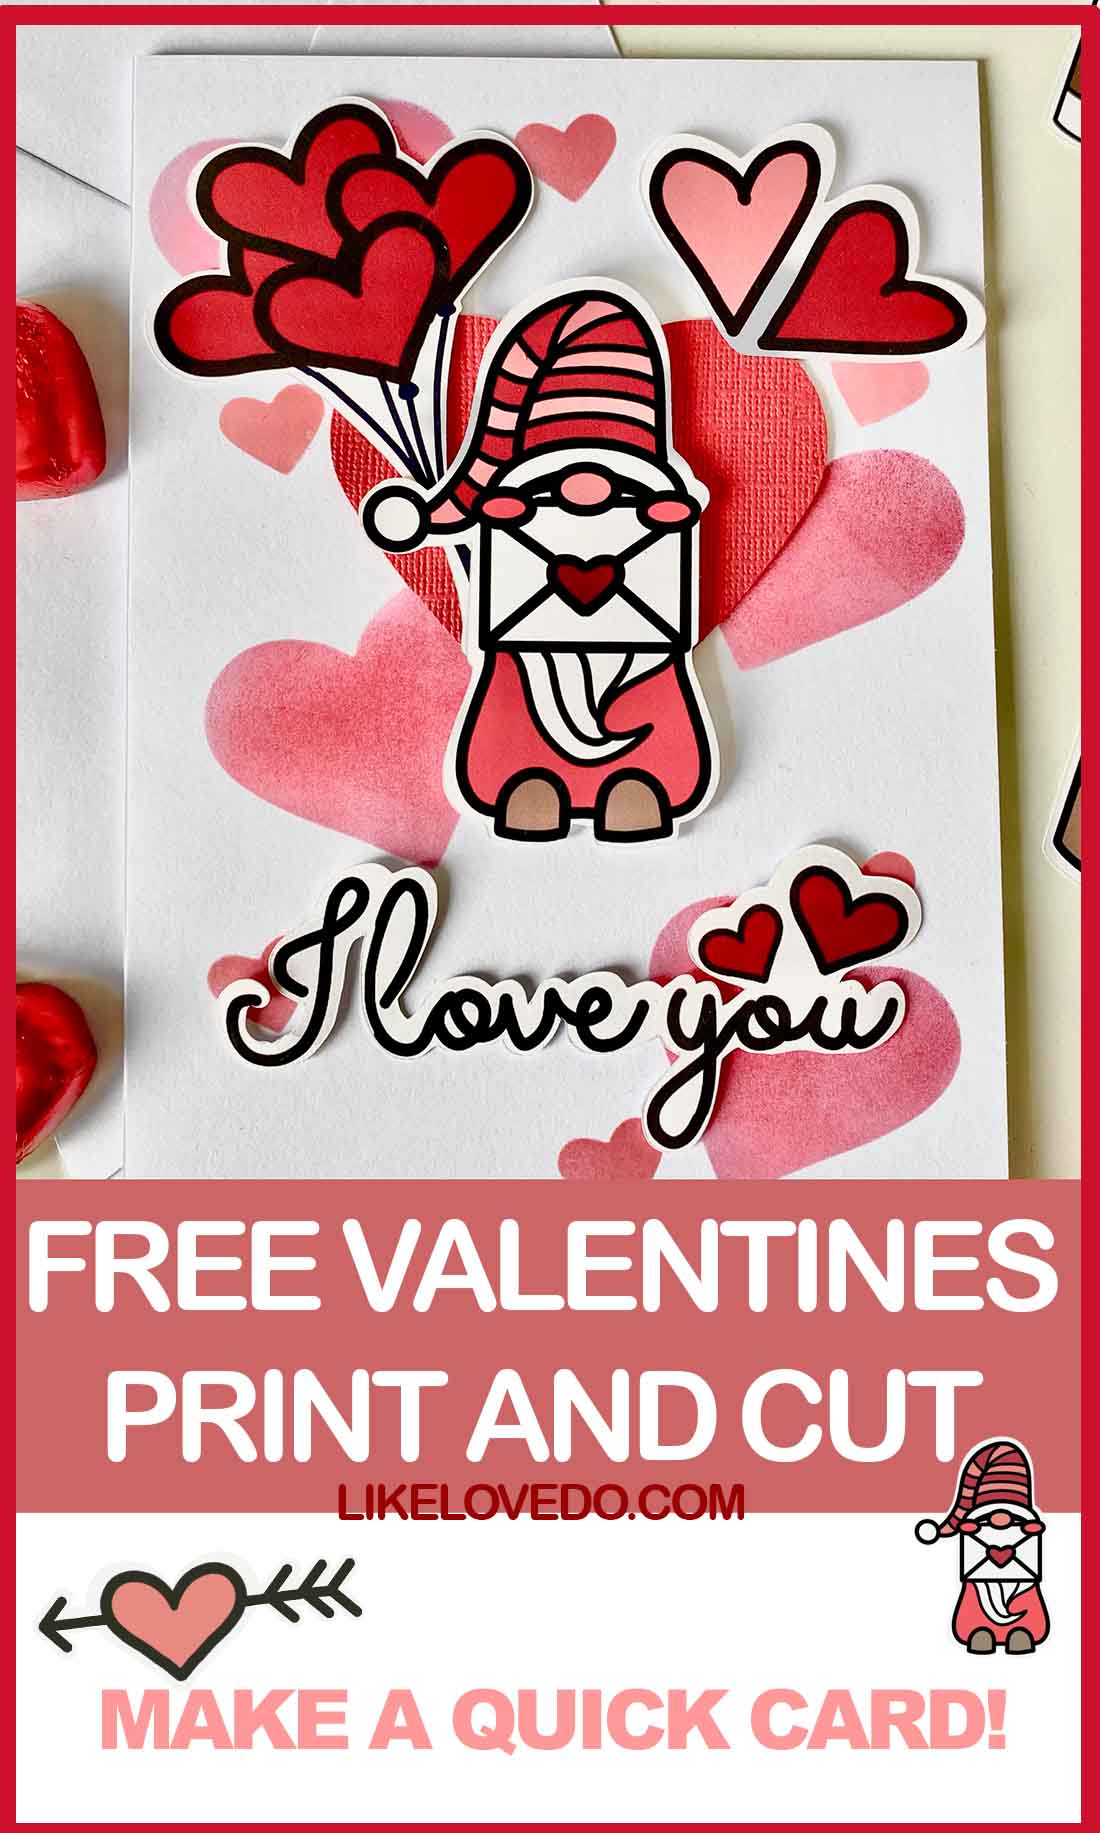 ot a valentines day card for your loved one? Grab this Free Valentine Printable clip art for a quick easy Valentines day card to make at home. Its so easy to print it at home and mount on to card or you can even make it print and cut on your Silhouette Cameo or Cricut machine and turn it in to stickers!